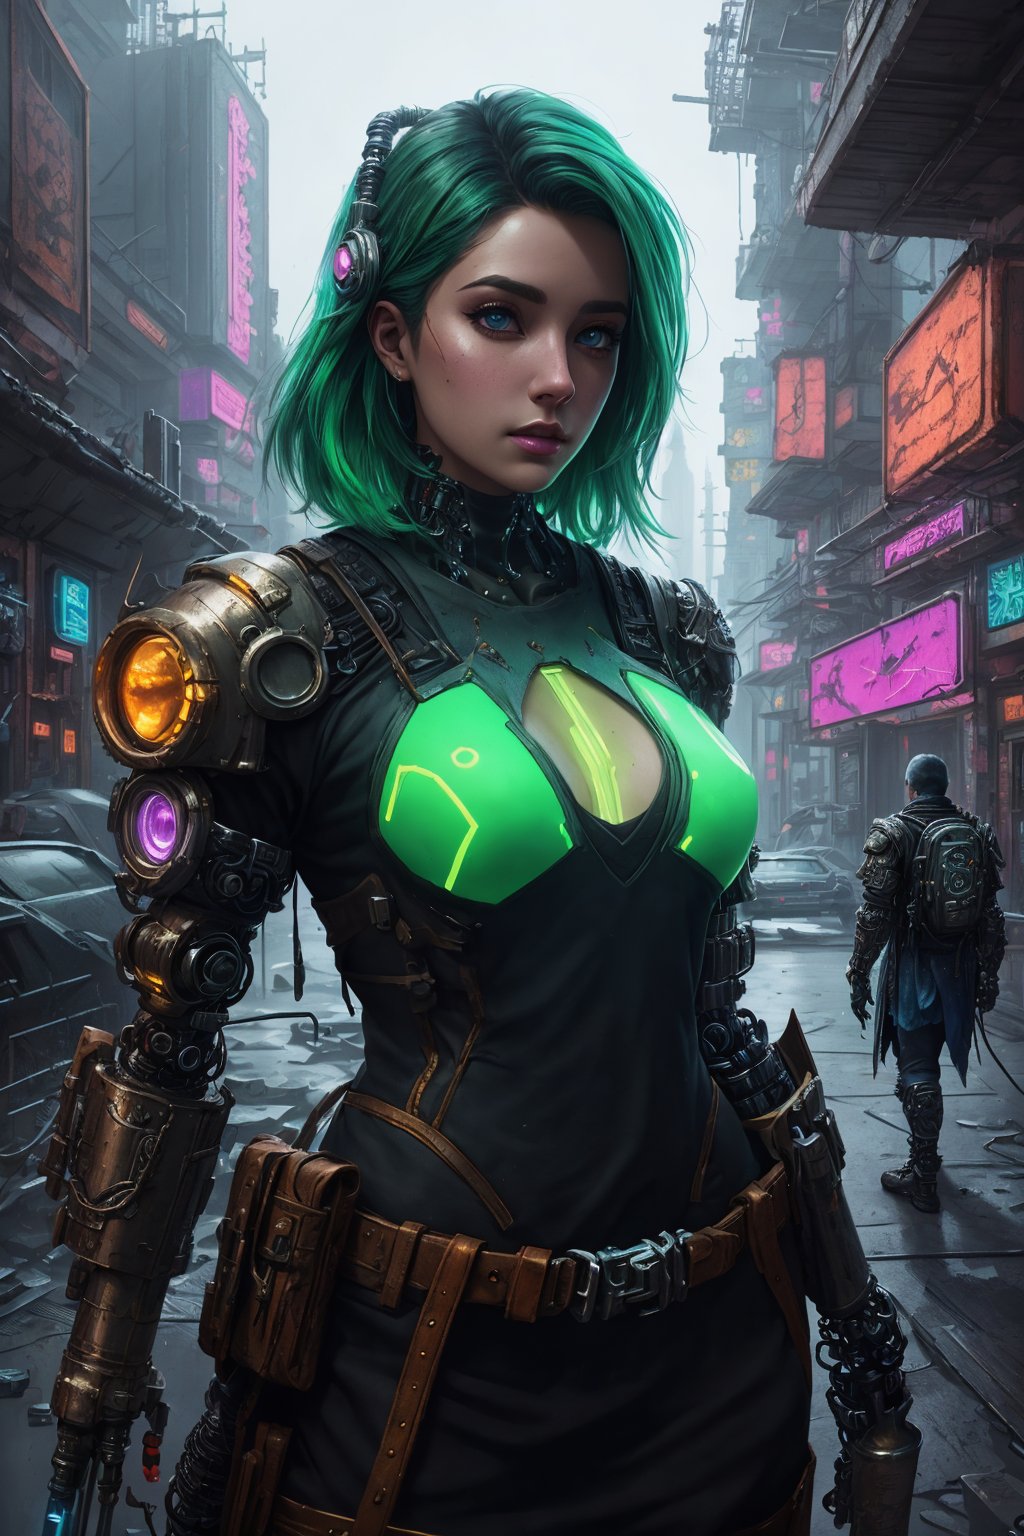 (best quality, 4K, highly detailed), (cyberpunk, D&D character), A cybernetic character from the world of D&D, adorned in a rusty metallic hunter armor with vivid green skin, seamlessly blending cyberpunk and fantasy elements. This trending ArtStation masterpiece, reminiscent of Greg Rutkowski, Loish, and Rhads, is a 4K pencil drawing with intricate details and an Unreal Engine twist.